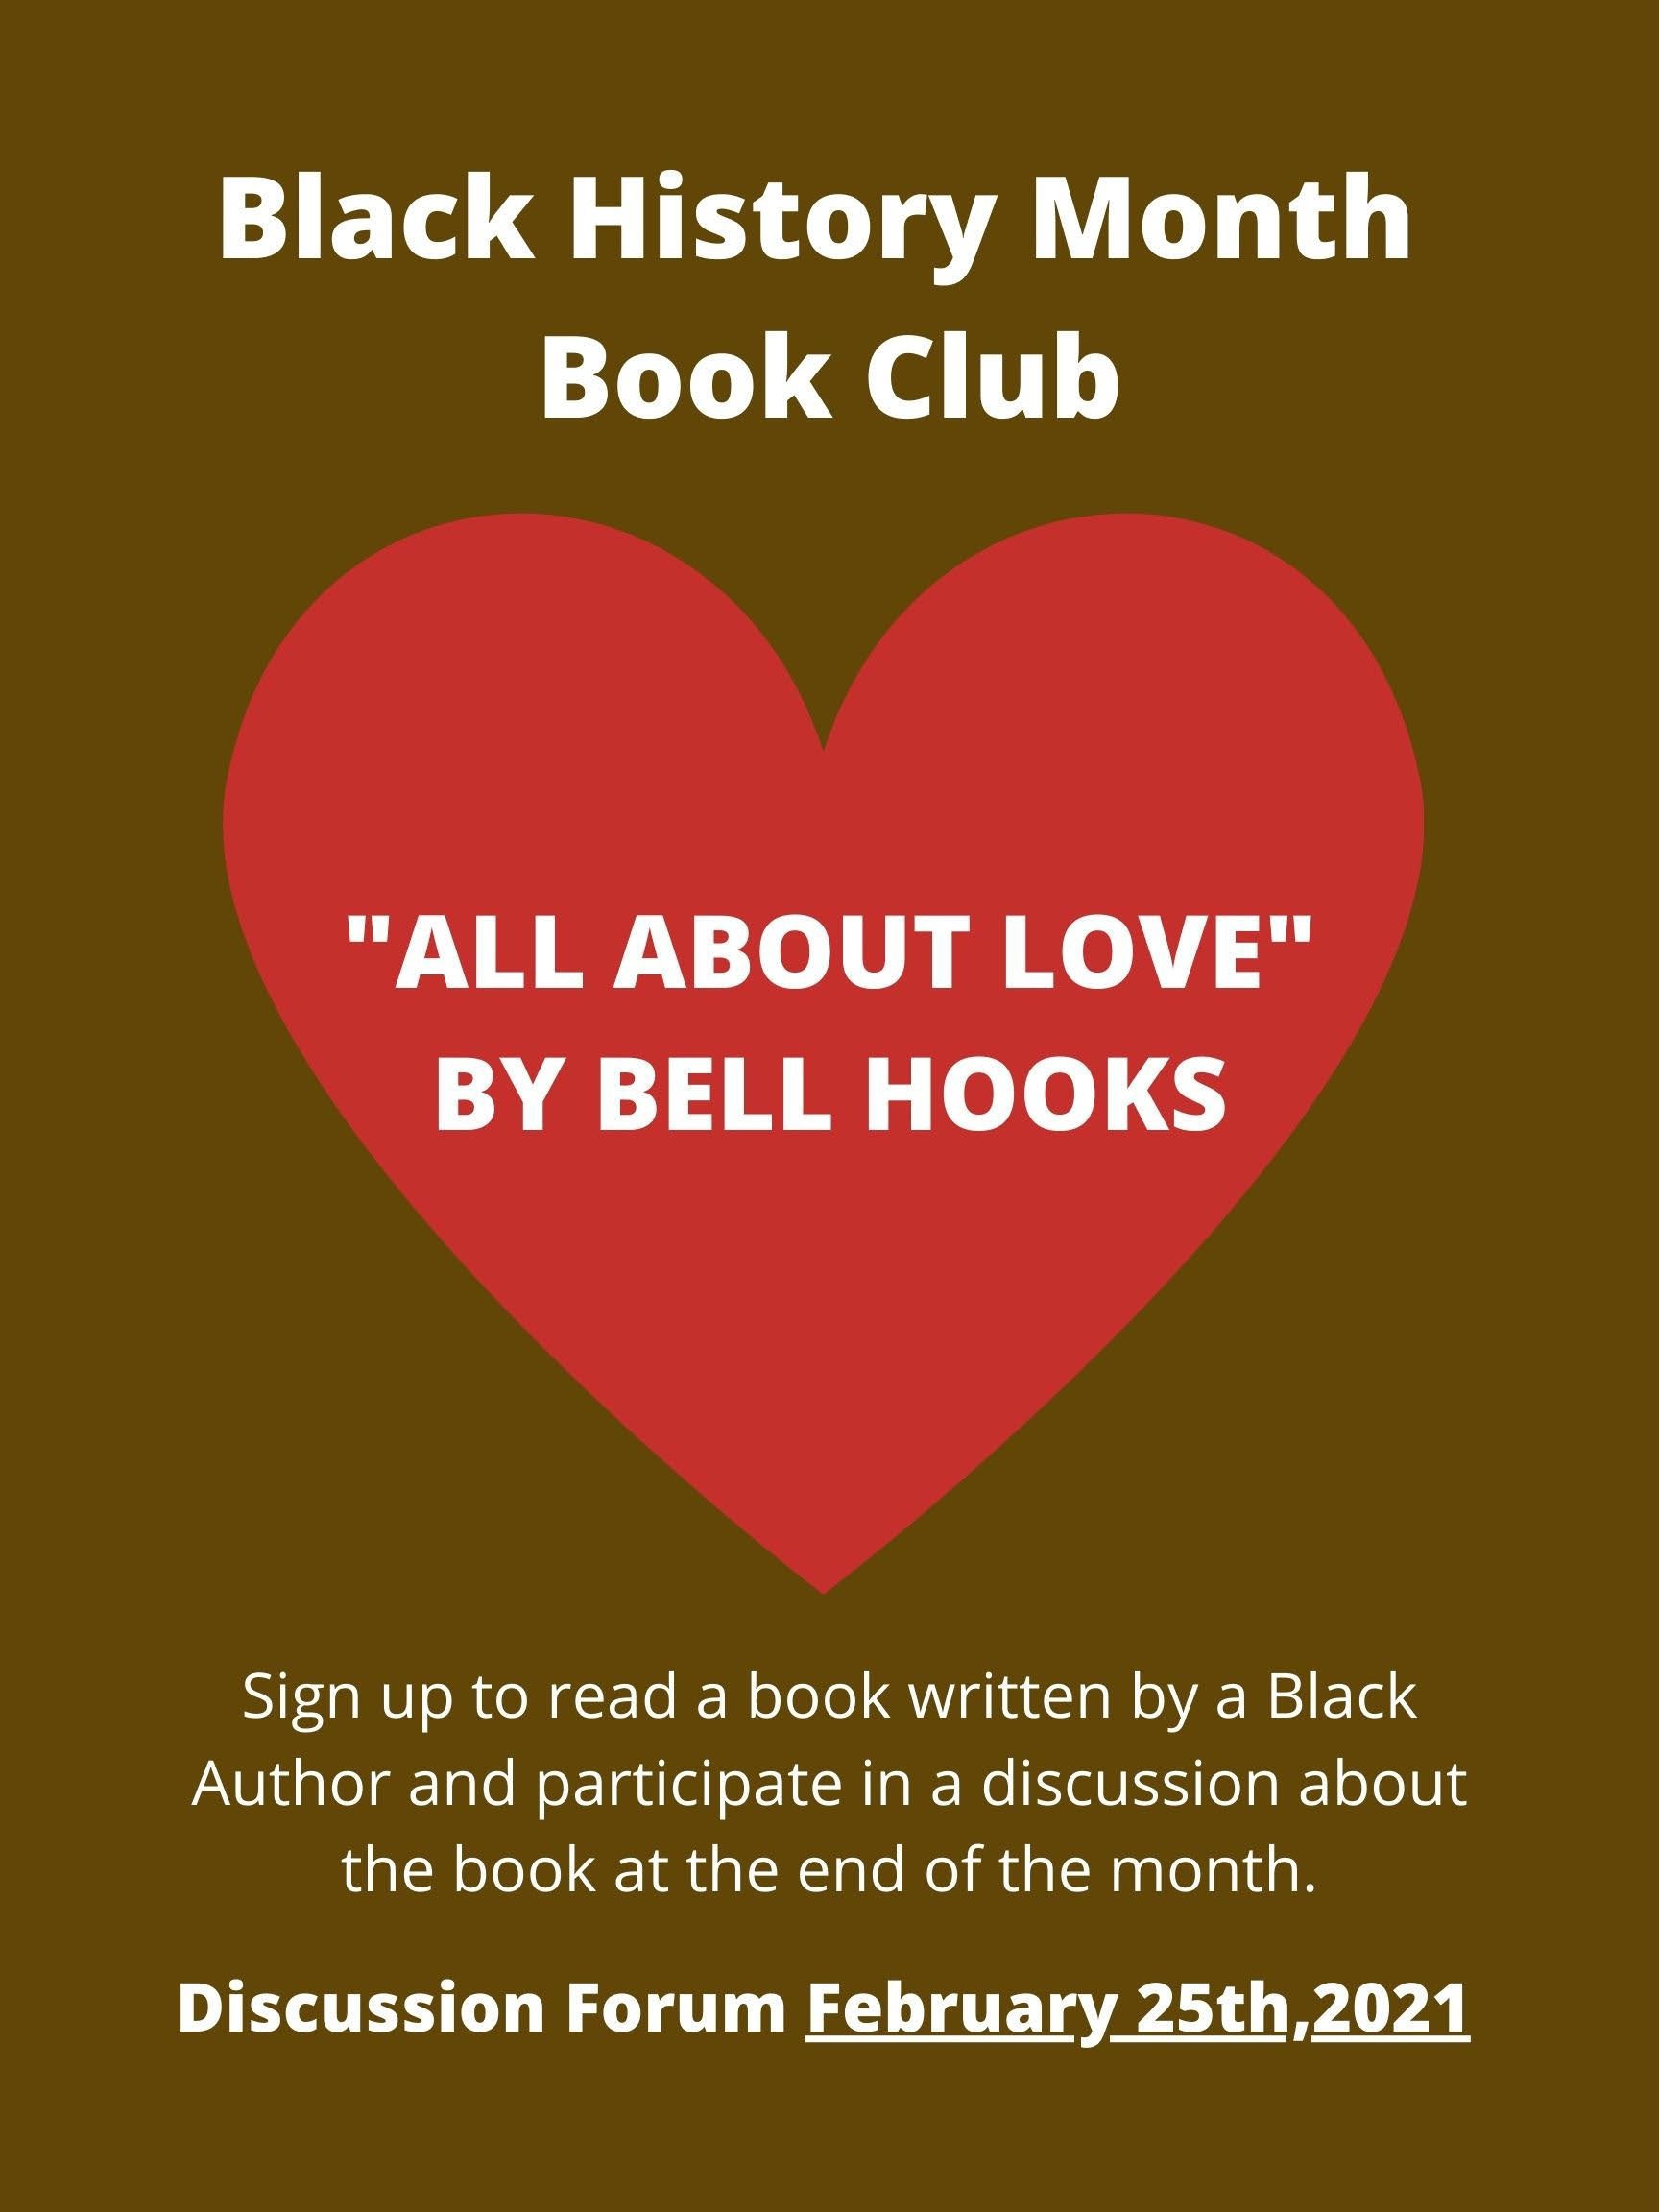 events_Black-History-Month-Book-Club-All-About-Love-by-Bell-Hooks_2021_np